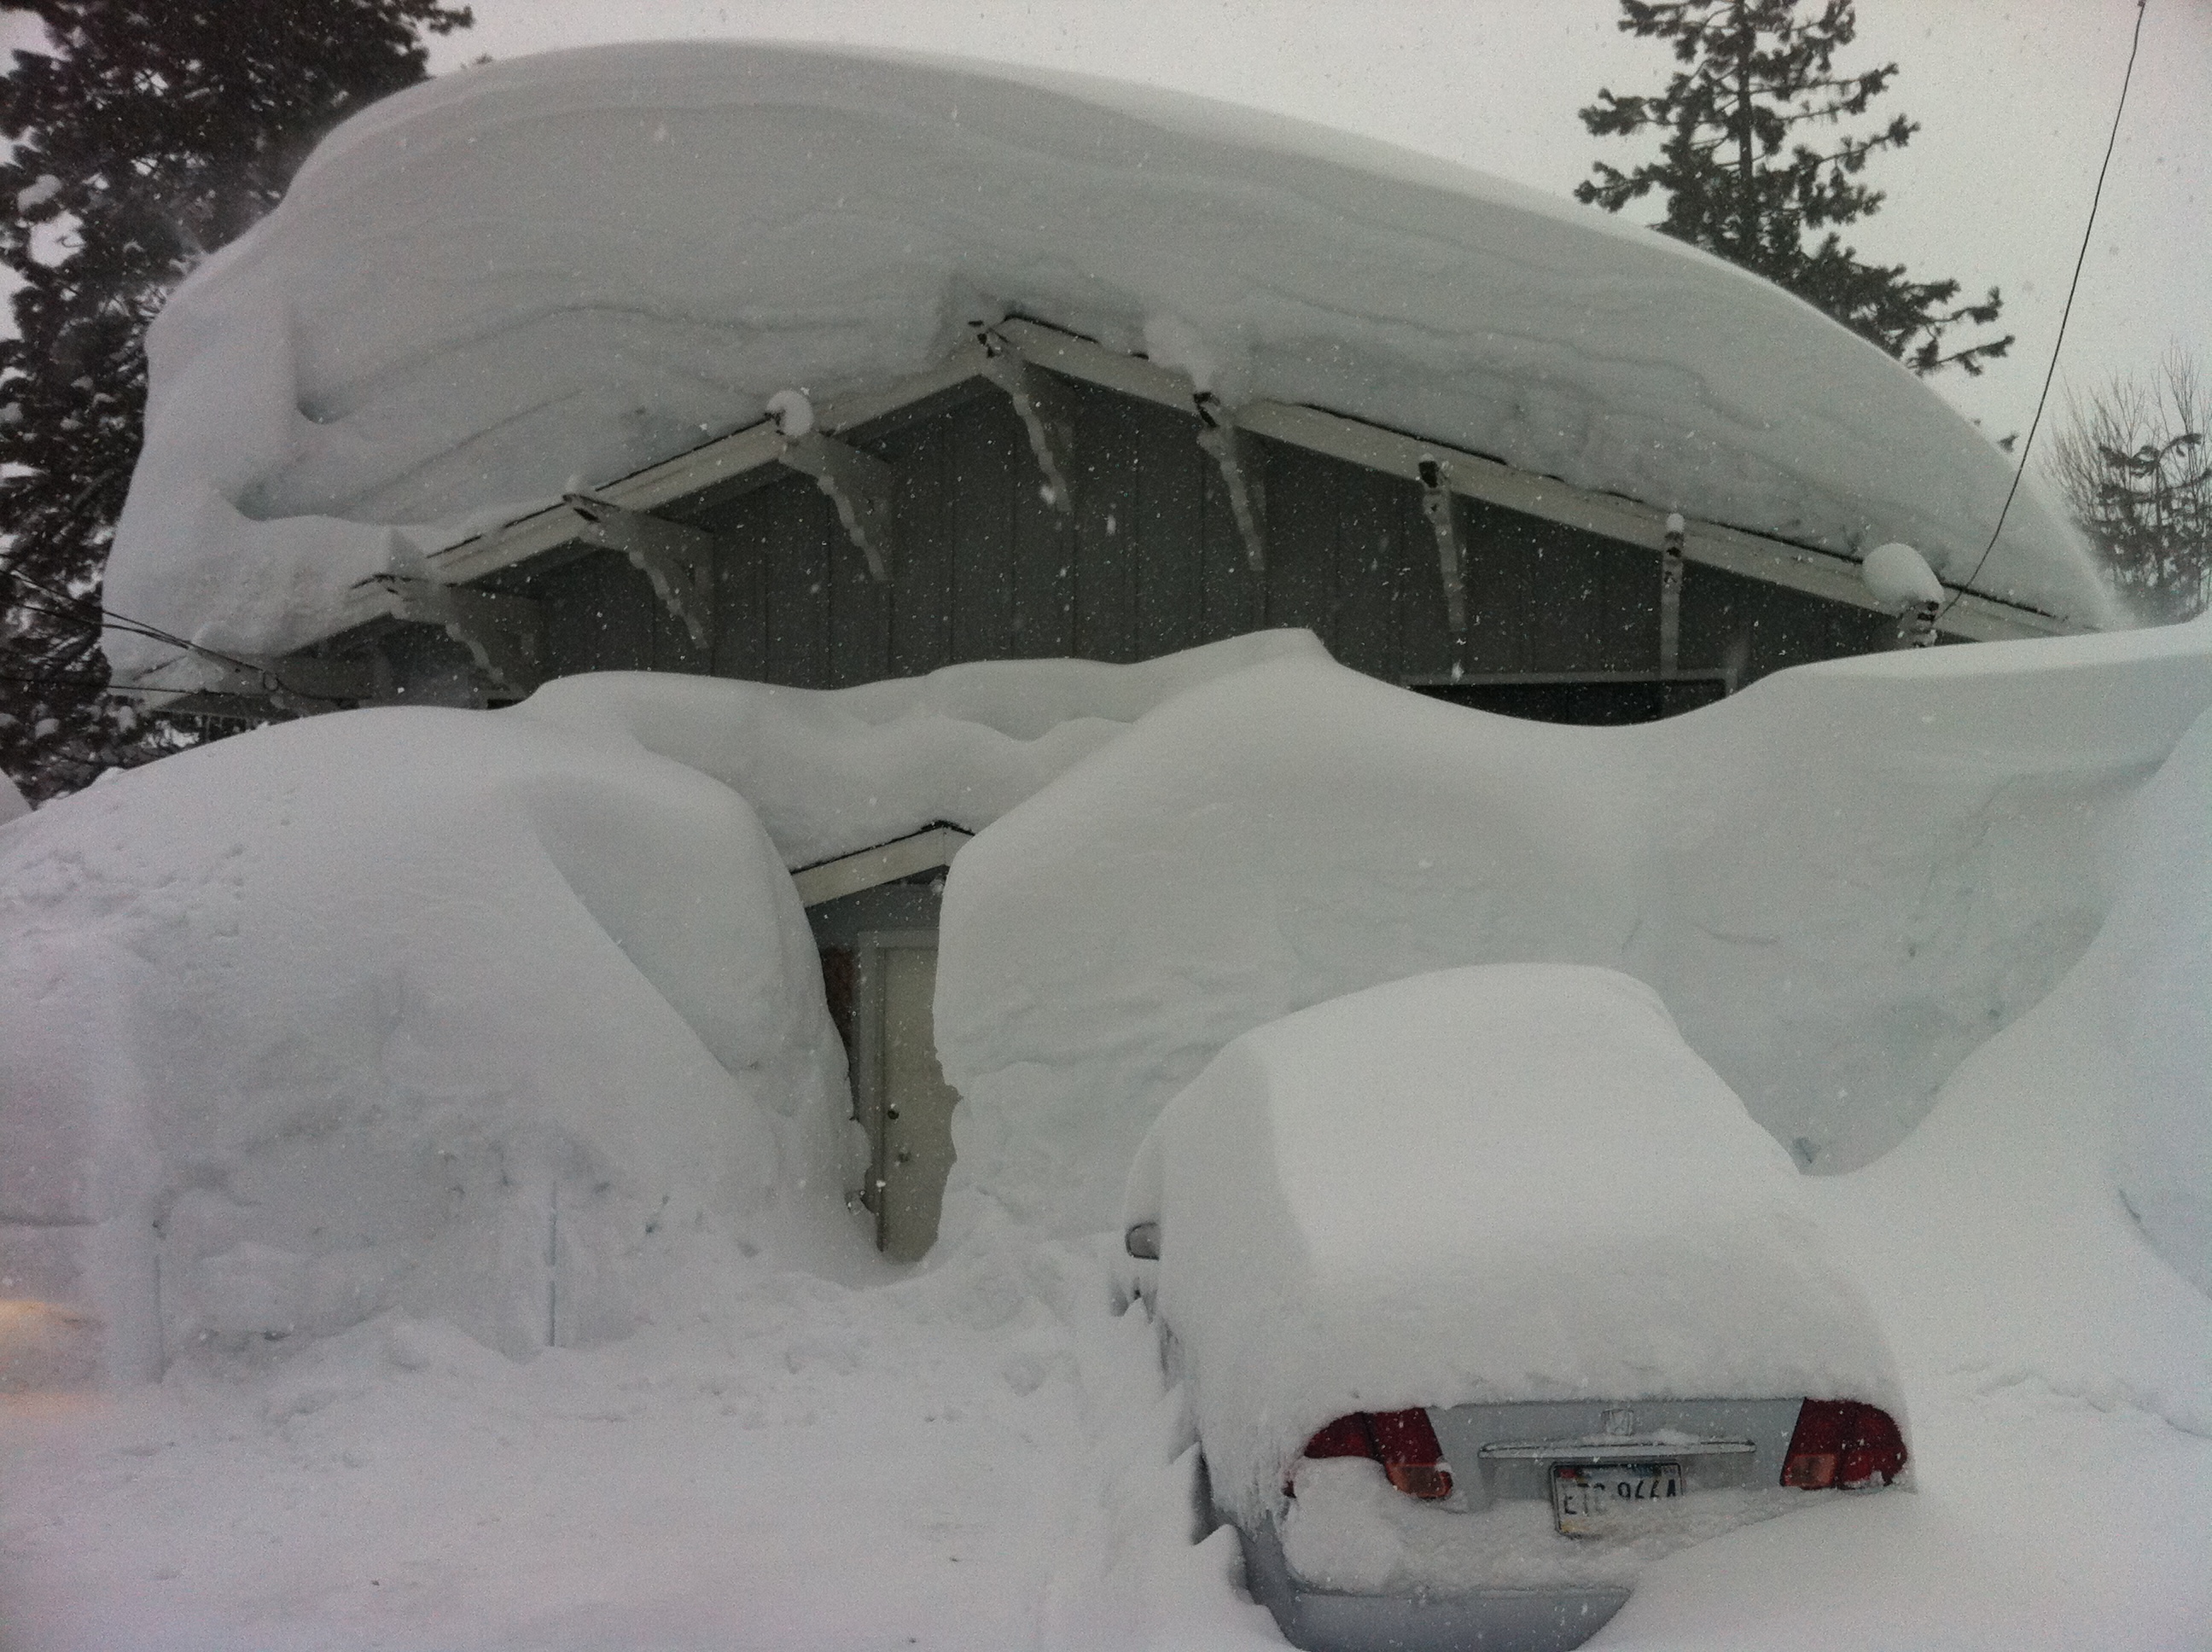 The amazingly deep snows in Lake Tahoe, CA in 2011 (which was a La Nina...) photo: miles clark/snowbrains